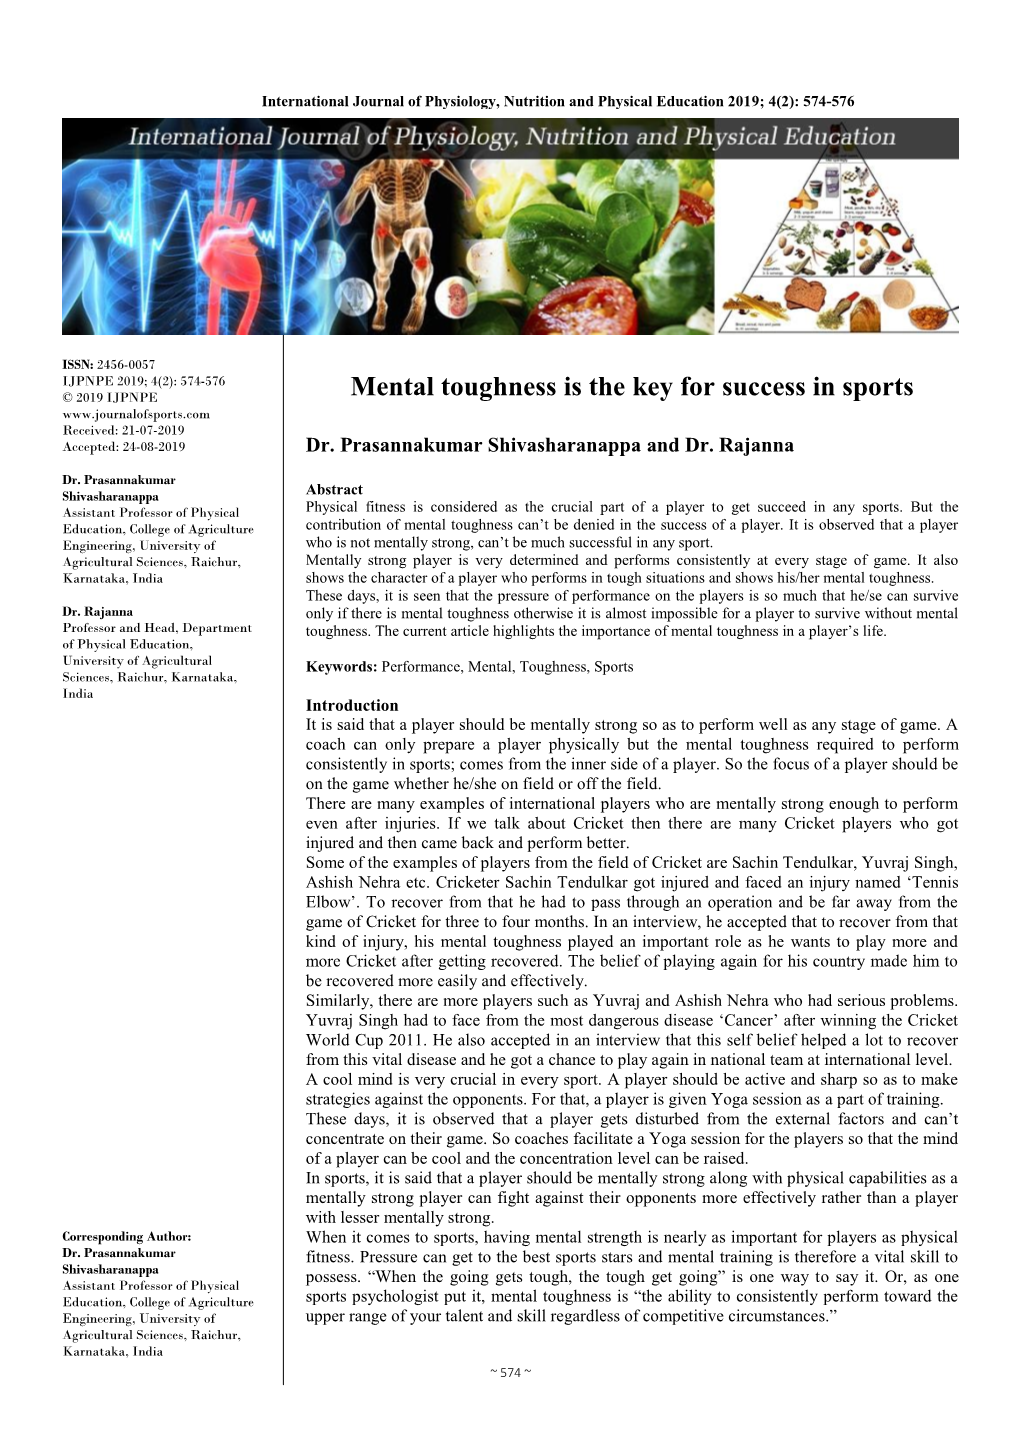 Mental Toughness Is the Key for Success in Sports Received: 21-07-2019 Accepted: 24-08-2019 Dr